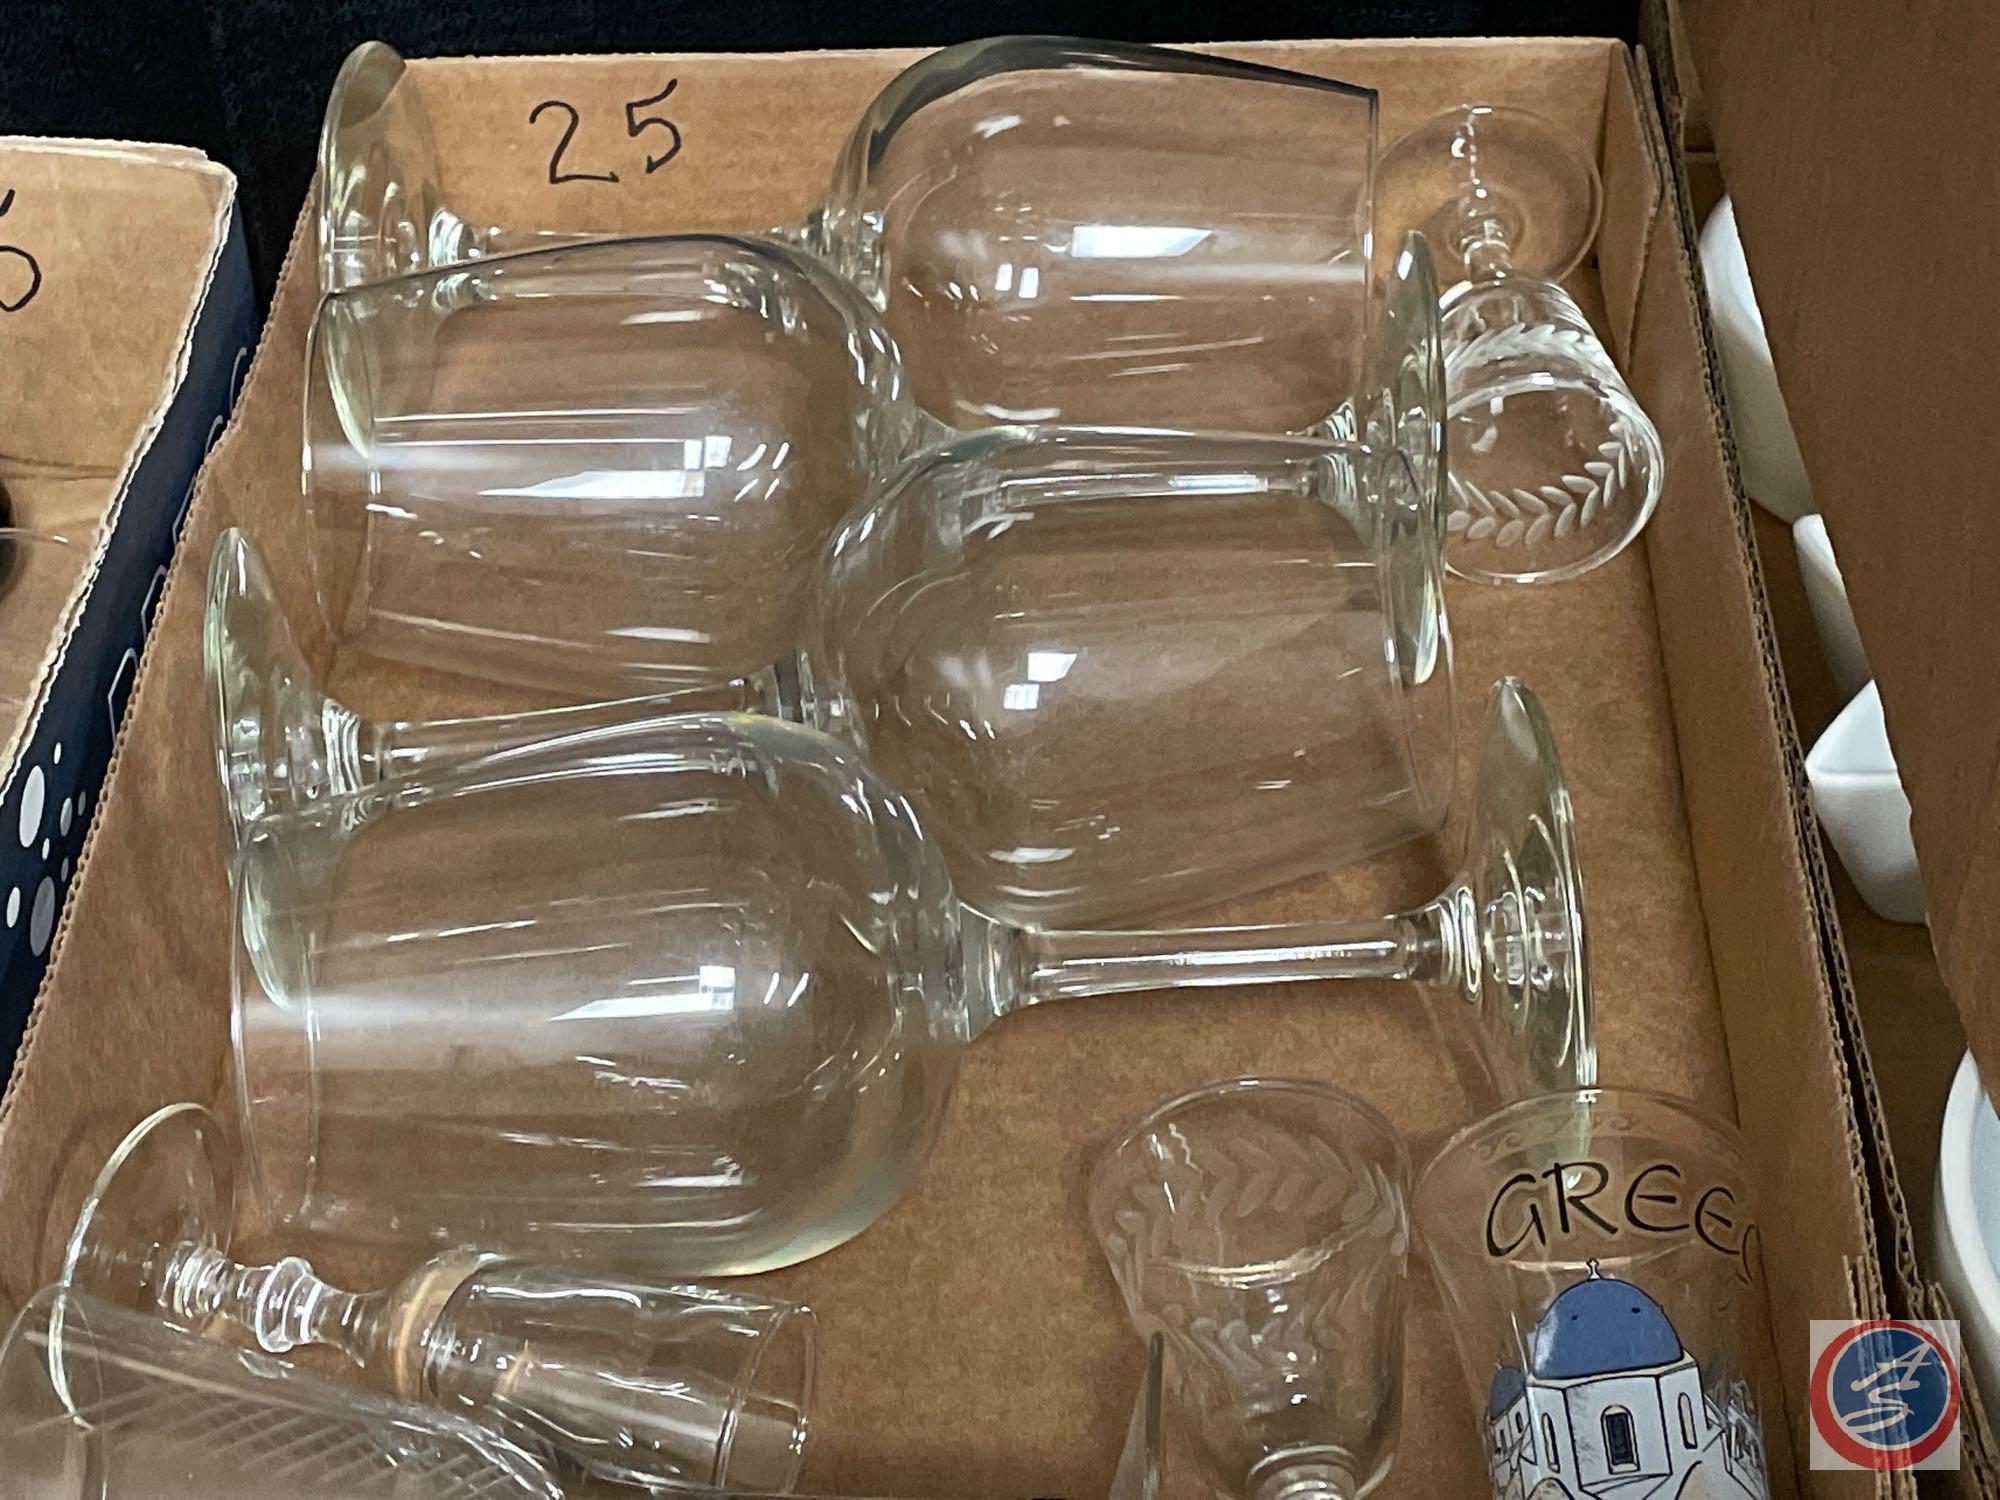 Clear Margarita Glasses "6 3/4" Also Stem Shot Glasses, MCM Glasses Cocktail Weighed Also A Cocktail